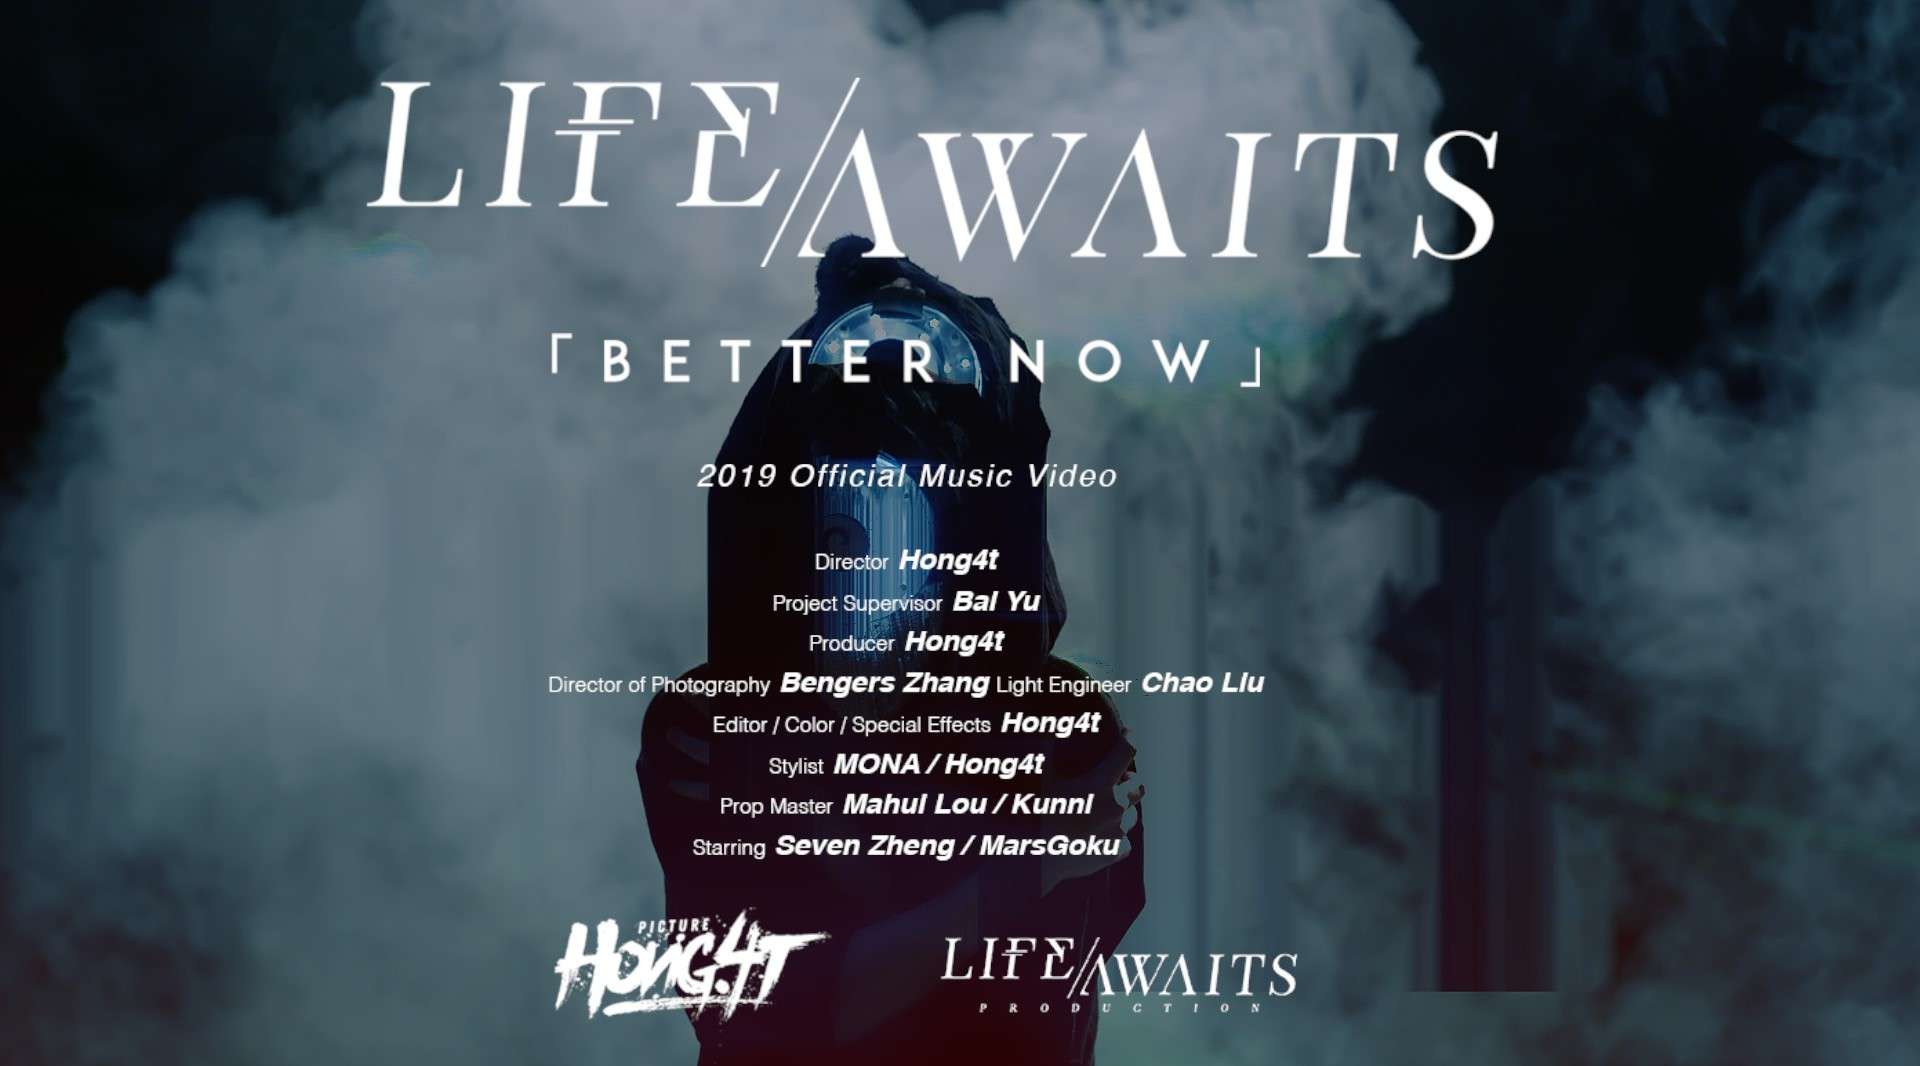 Life Awaits 往生 - Better now （2019 Official Music Video）